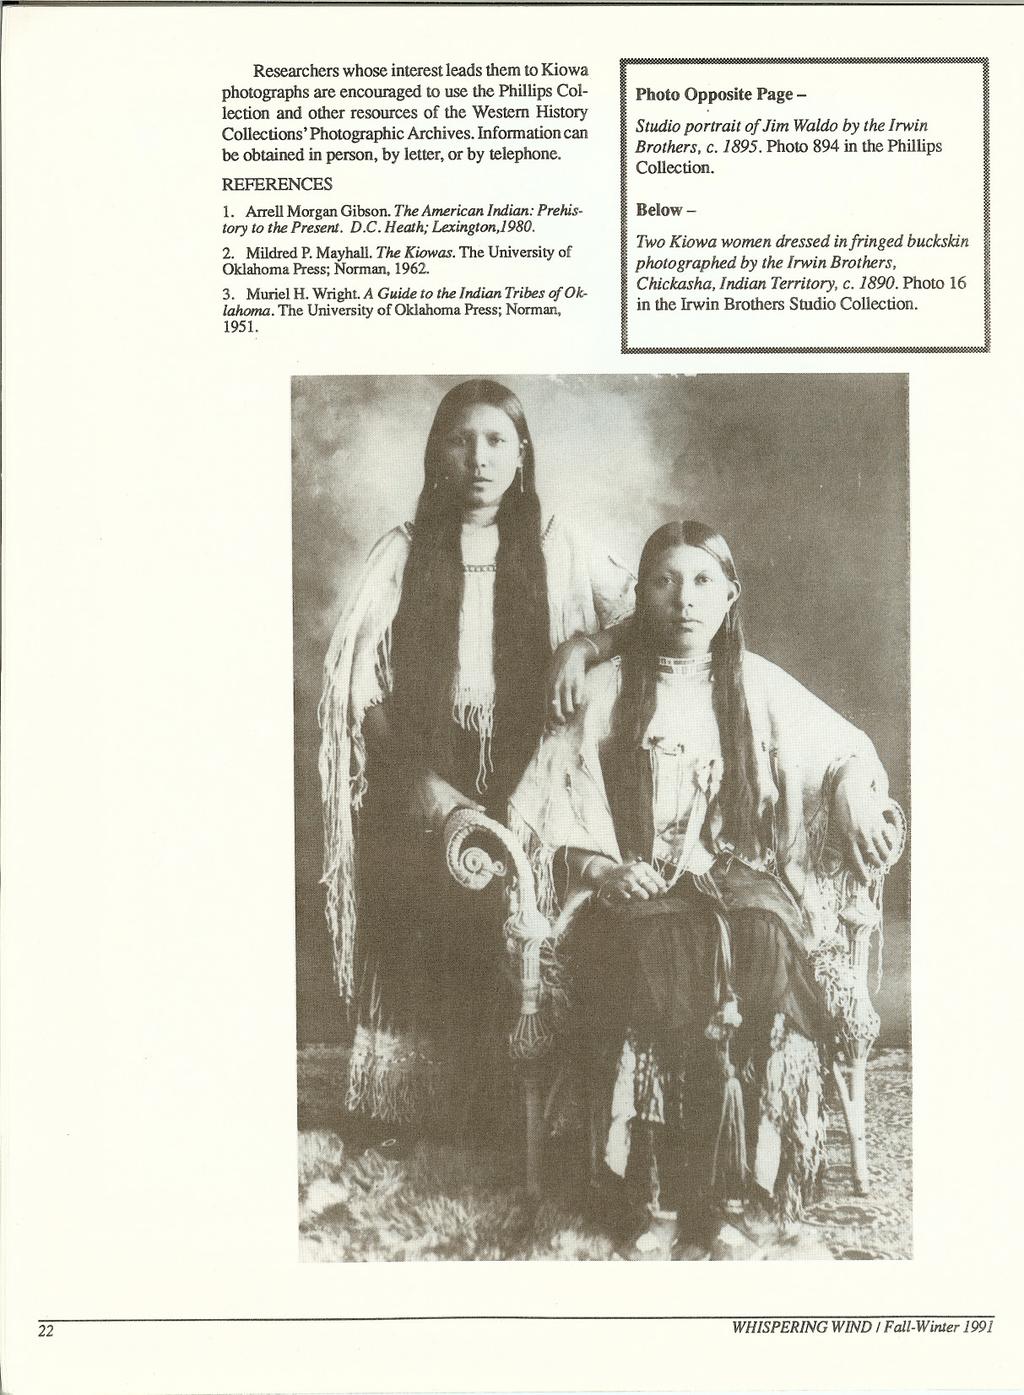 Researchers whose interest leads them to Kiowa photographs are encouraged to use the Phillips Collection and other resources of the Western History Collections' Photographic Archives.